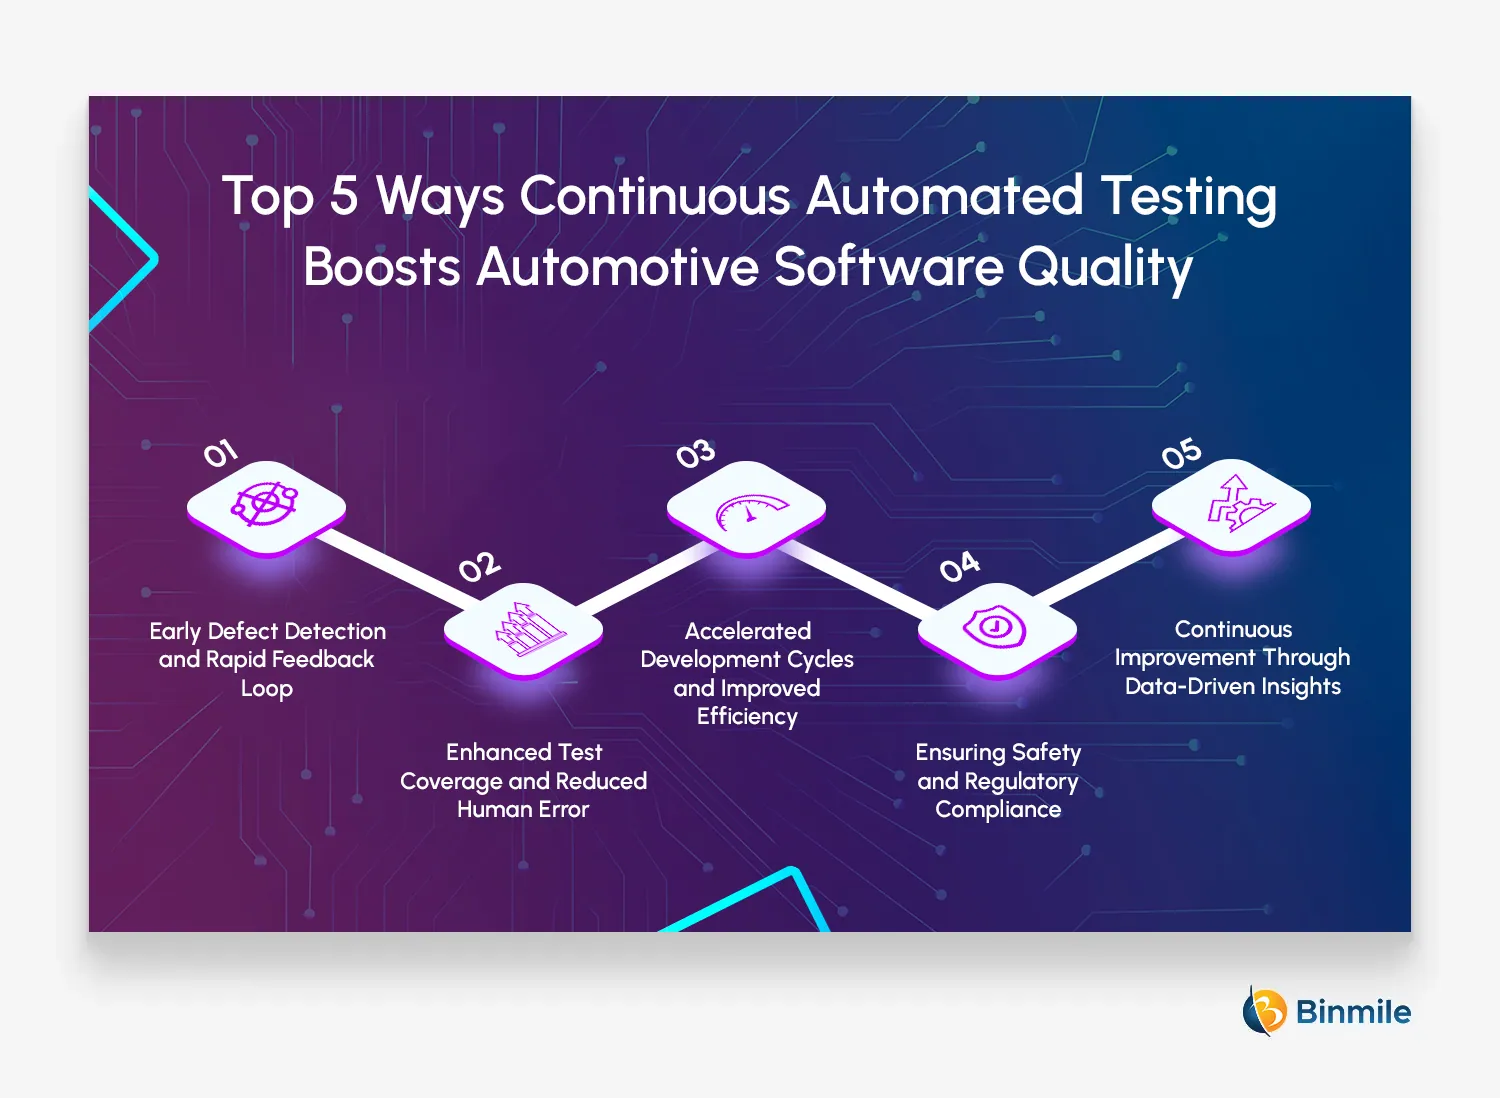 Top 5 Ways Continuous Automated Testing Boosts Automotive Software Quality | Binmile